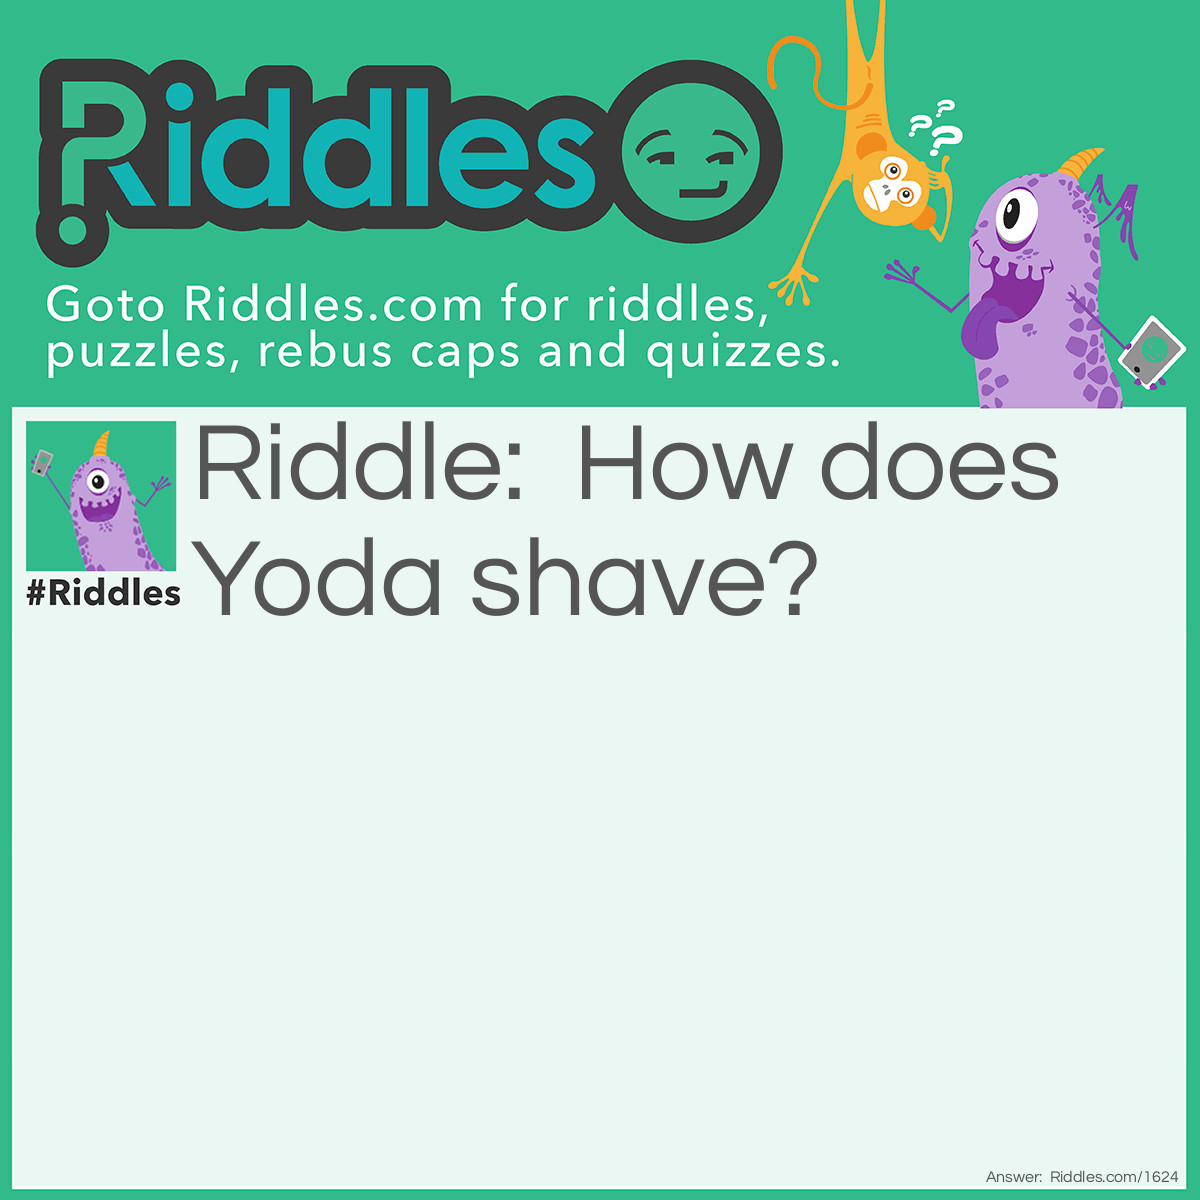 Riddle: How does Yoda shave? Answer: With a laser-blade.